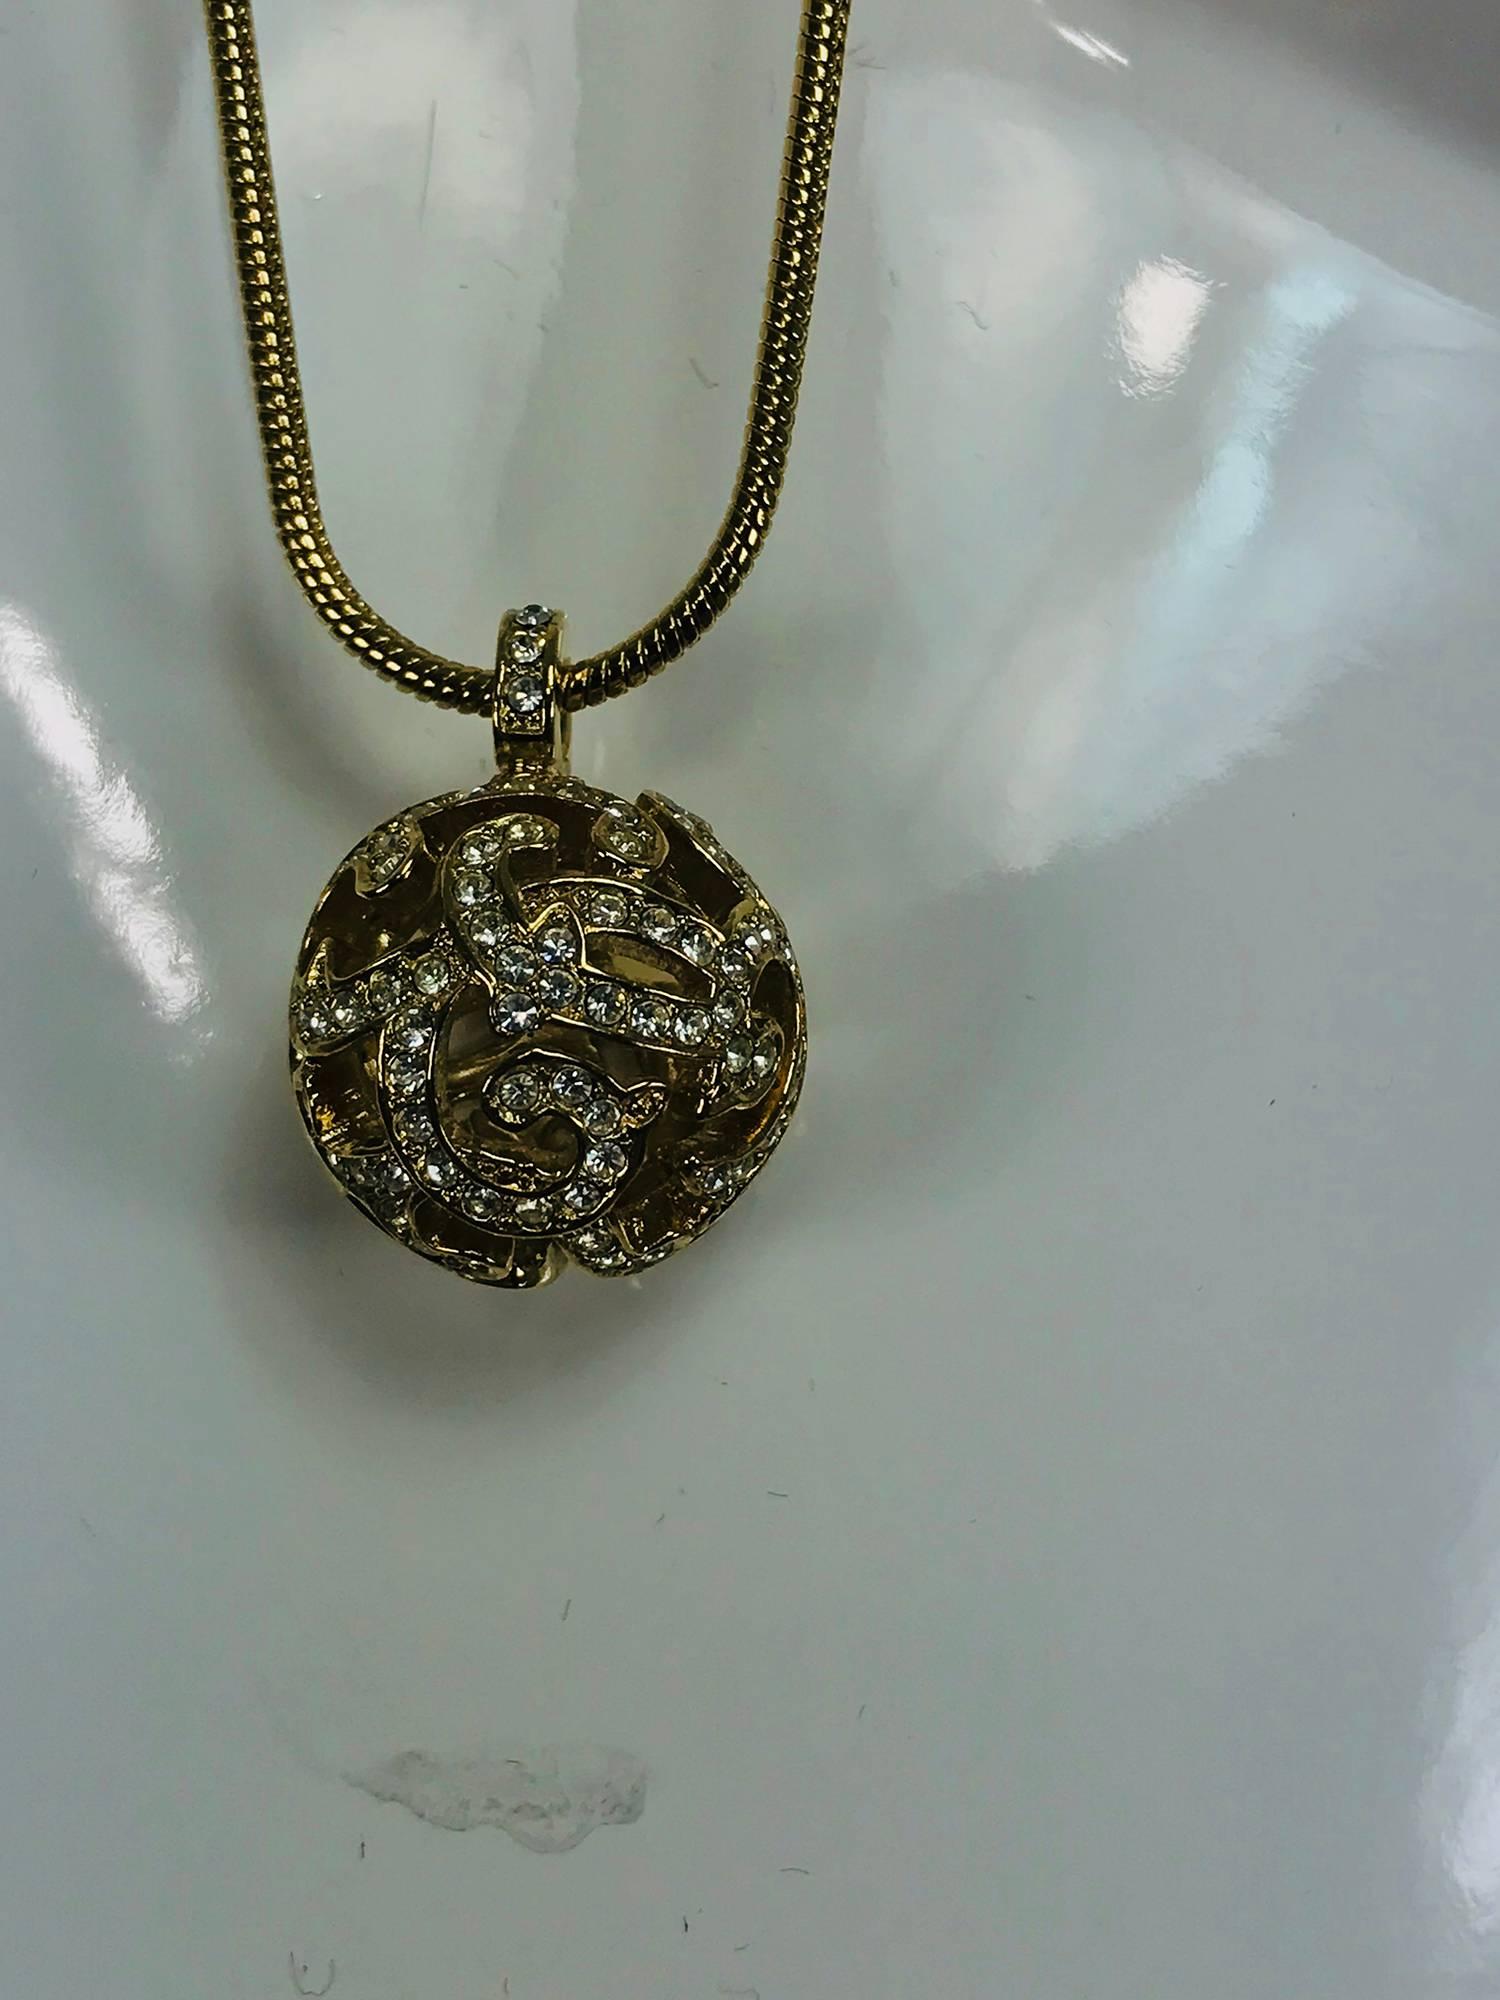 Christian Dior gold snake chain with open work rhinestone orb drop necklace in excellent condition.
Measurements are:
16 1/4